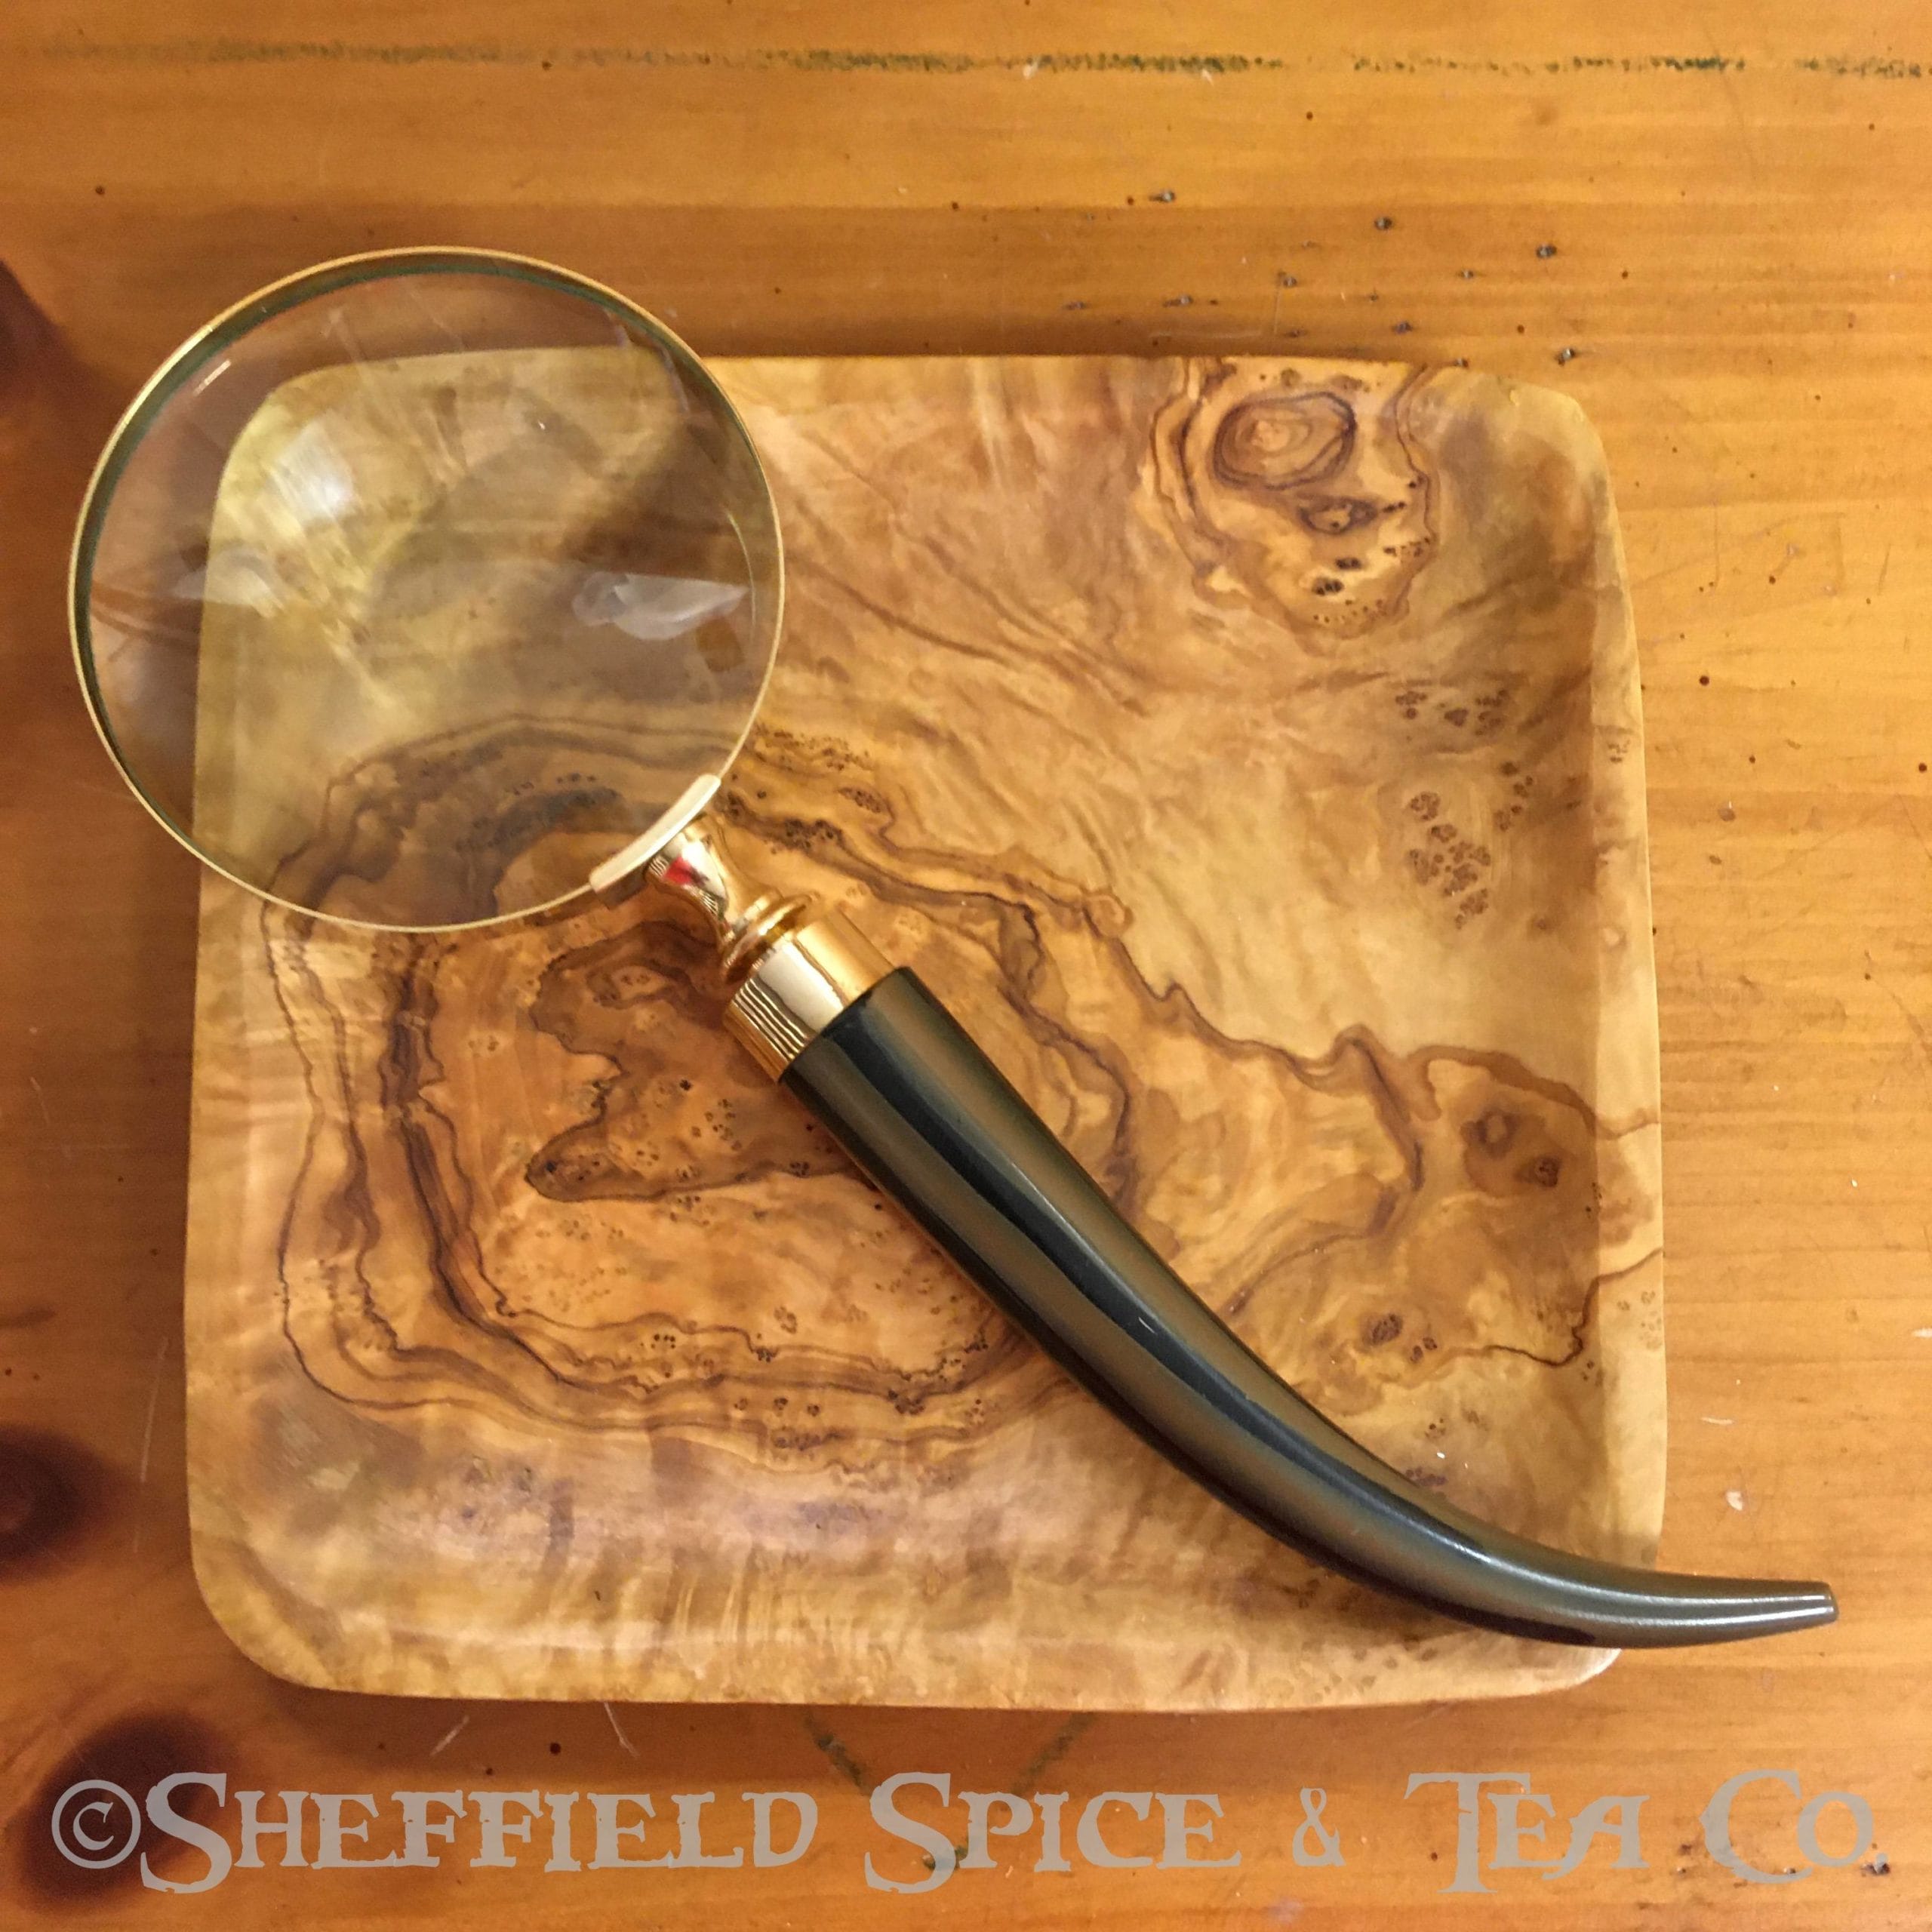 Magnifying Glasses Magnifying Glass